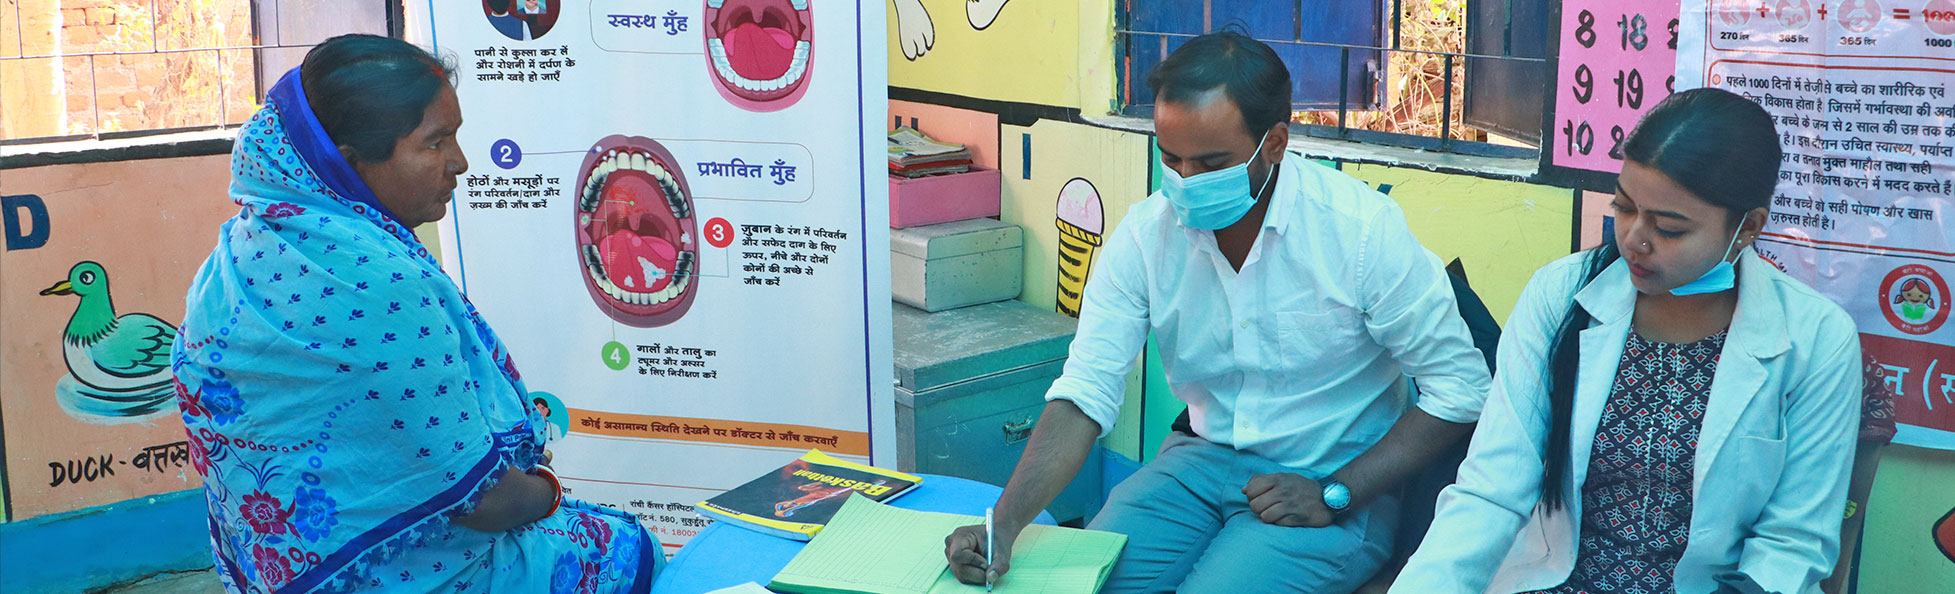 Free screening conducted for oral, breast and cervical cancers